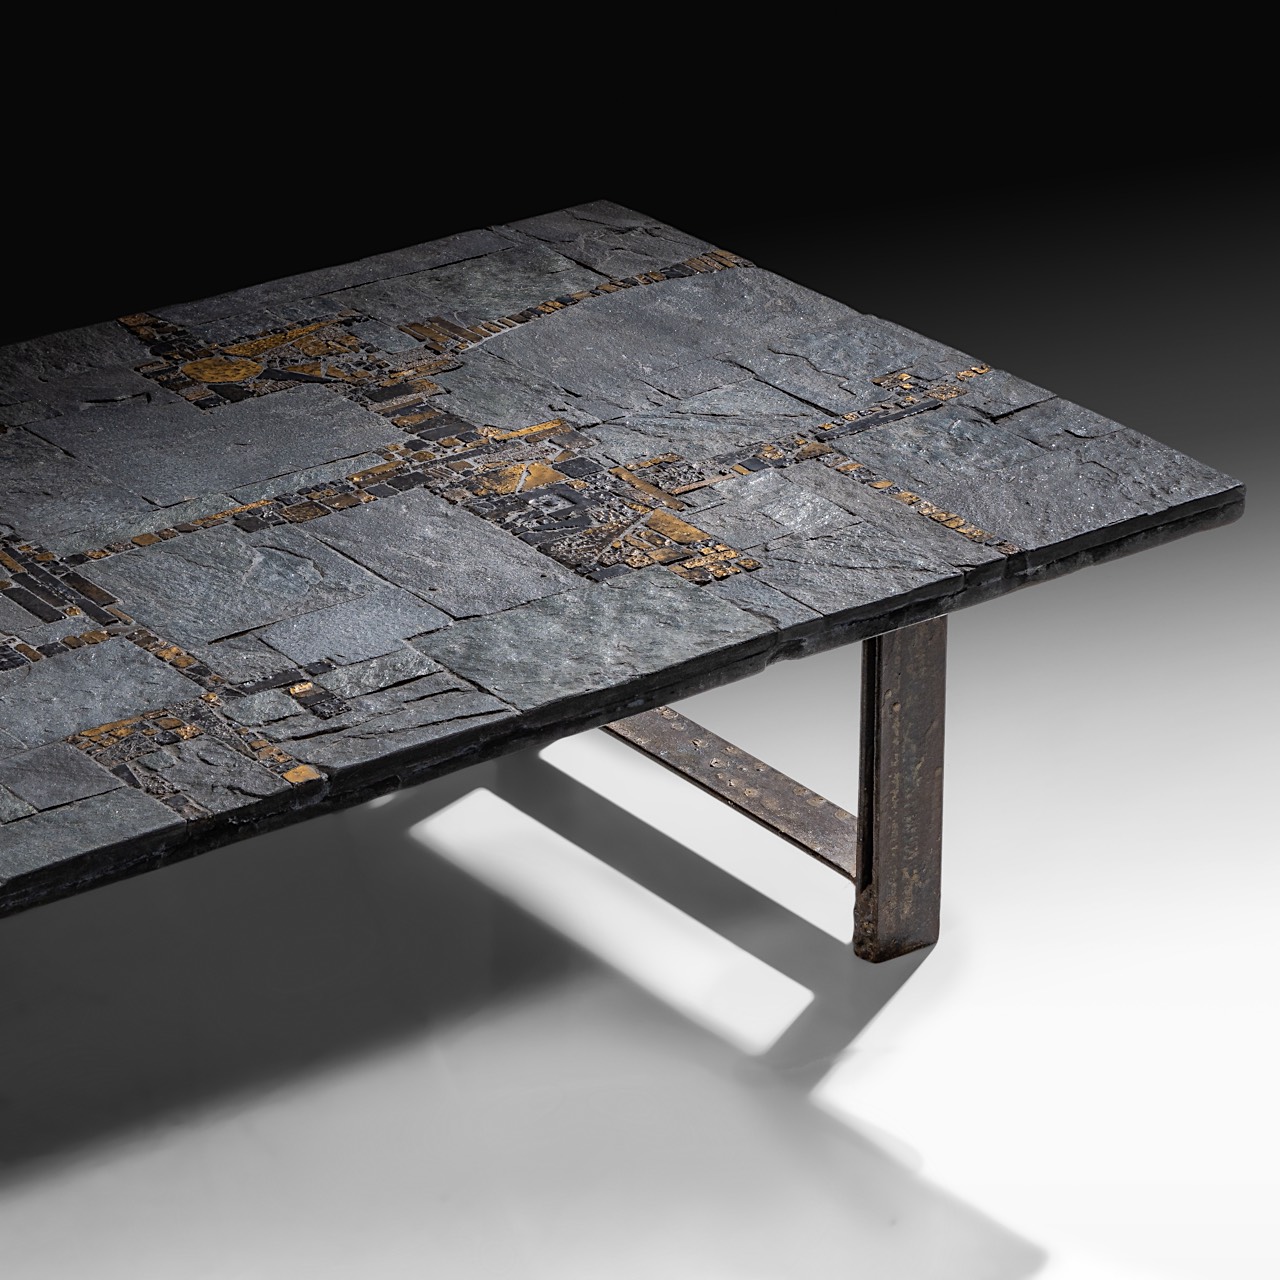 A vintage '60s Pia Manu coffee table, slate stone and gilt-glazed ceramic table top on a steel frame - Image 10 of 16